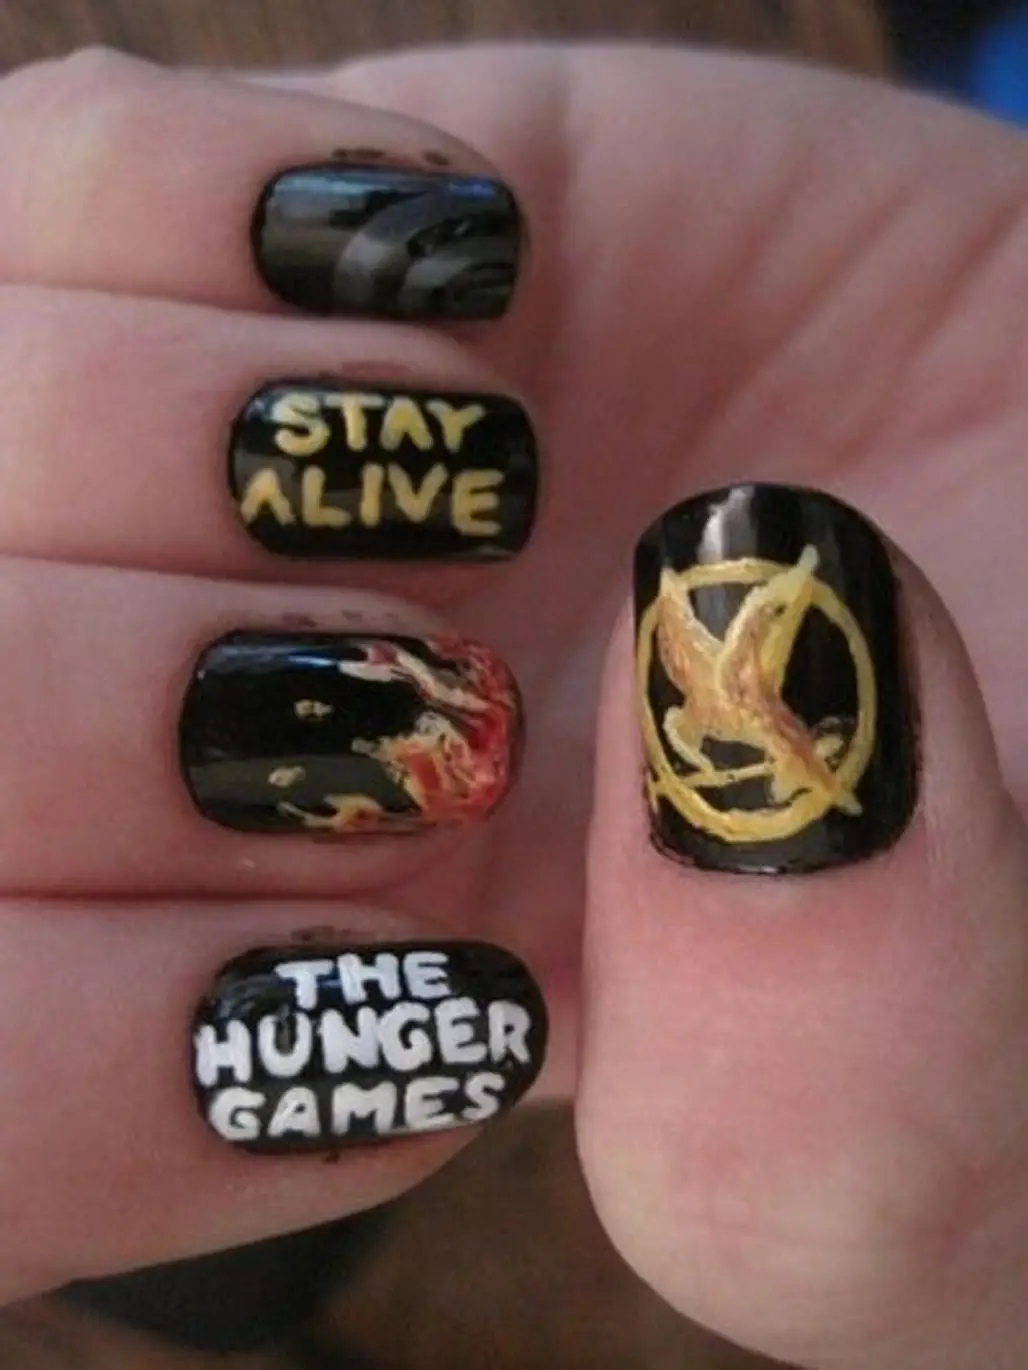 Everything Cool about the Hunger Games